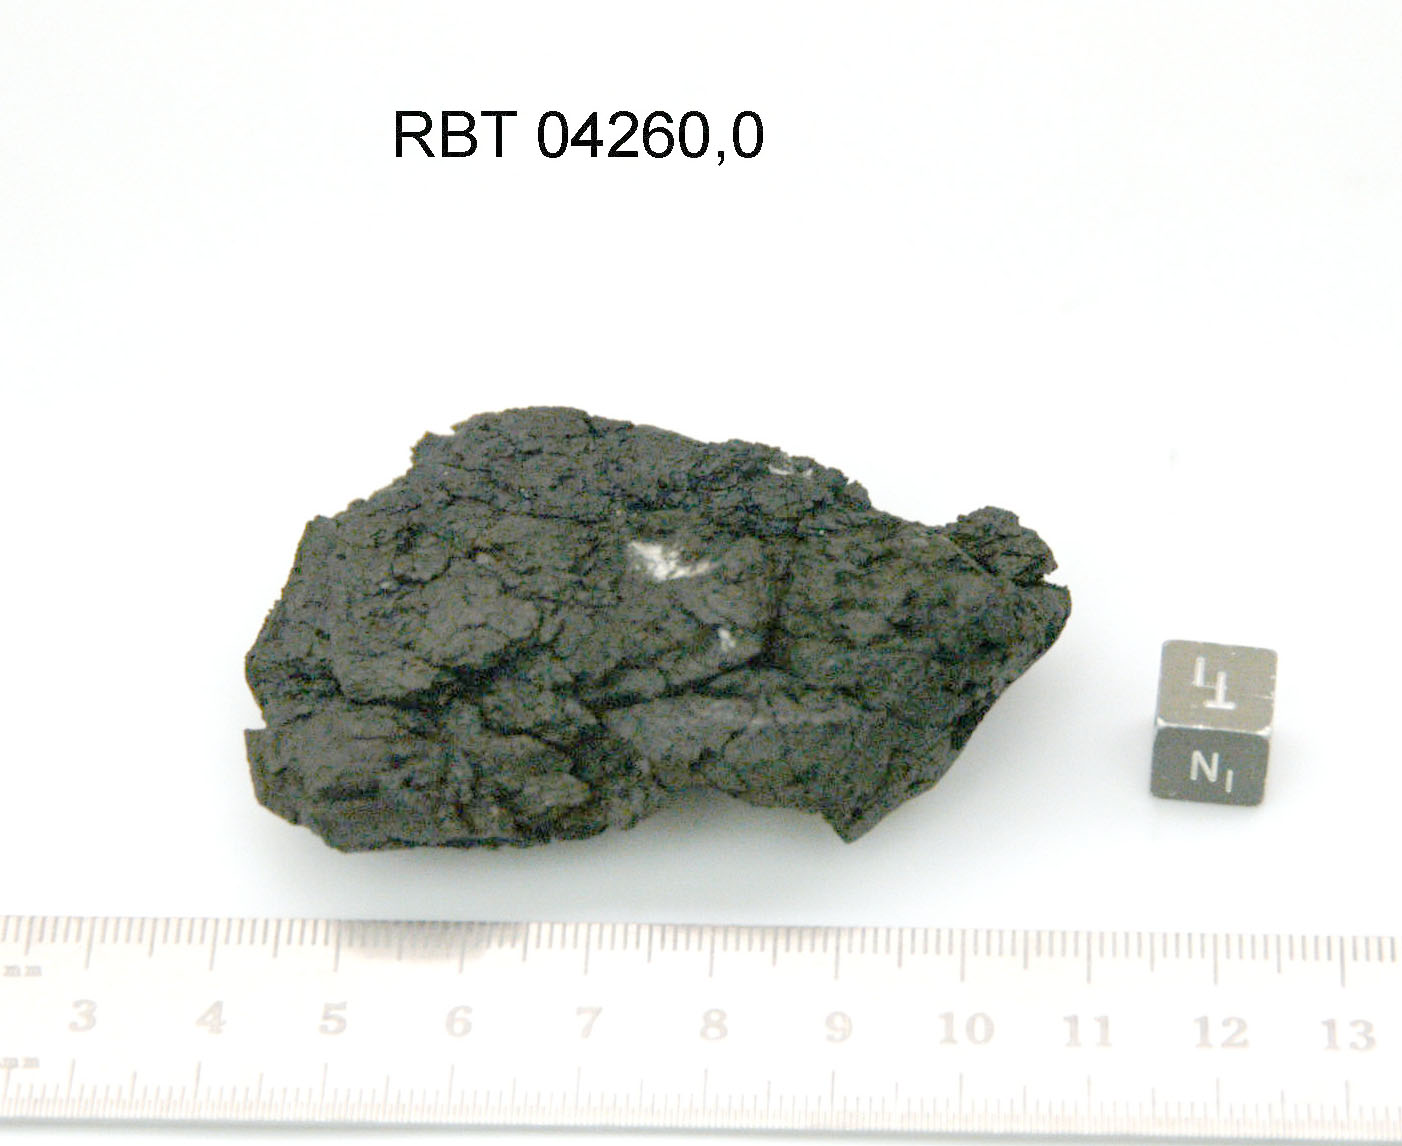 Lab Photo of Sample RBT 04260 Showing North View